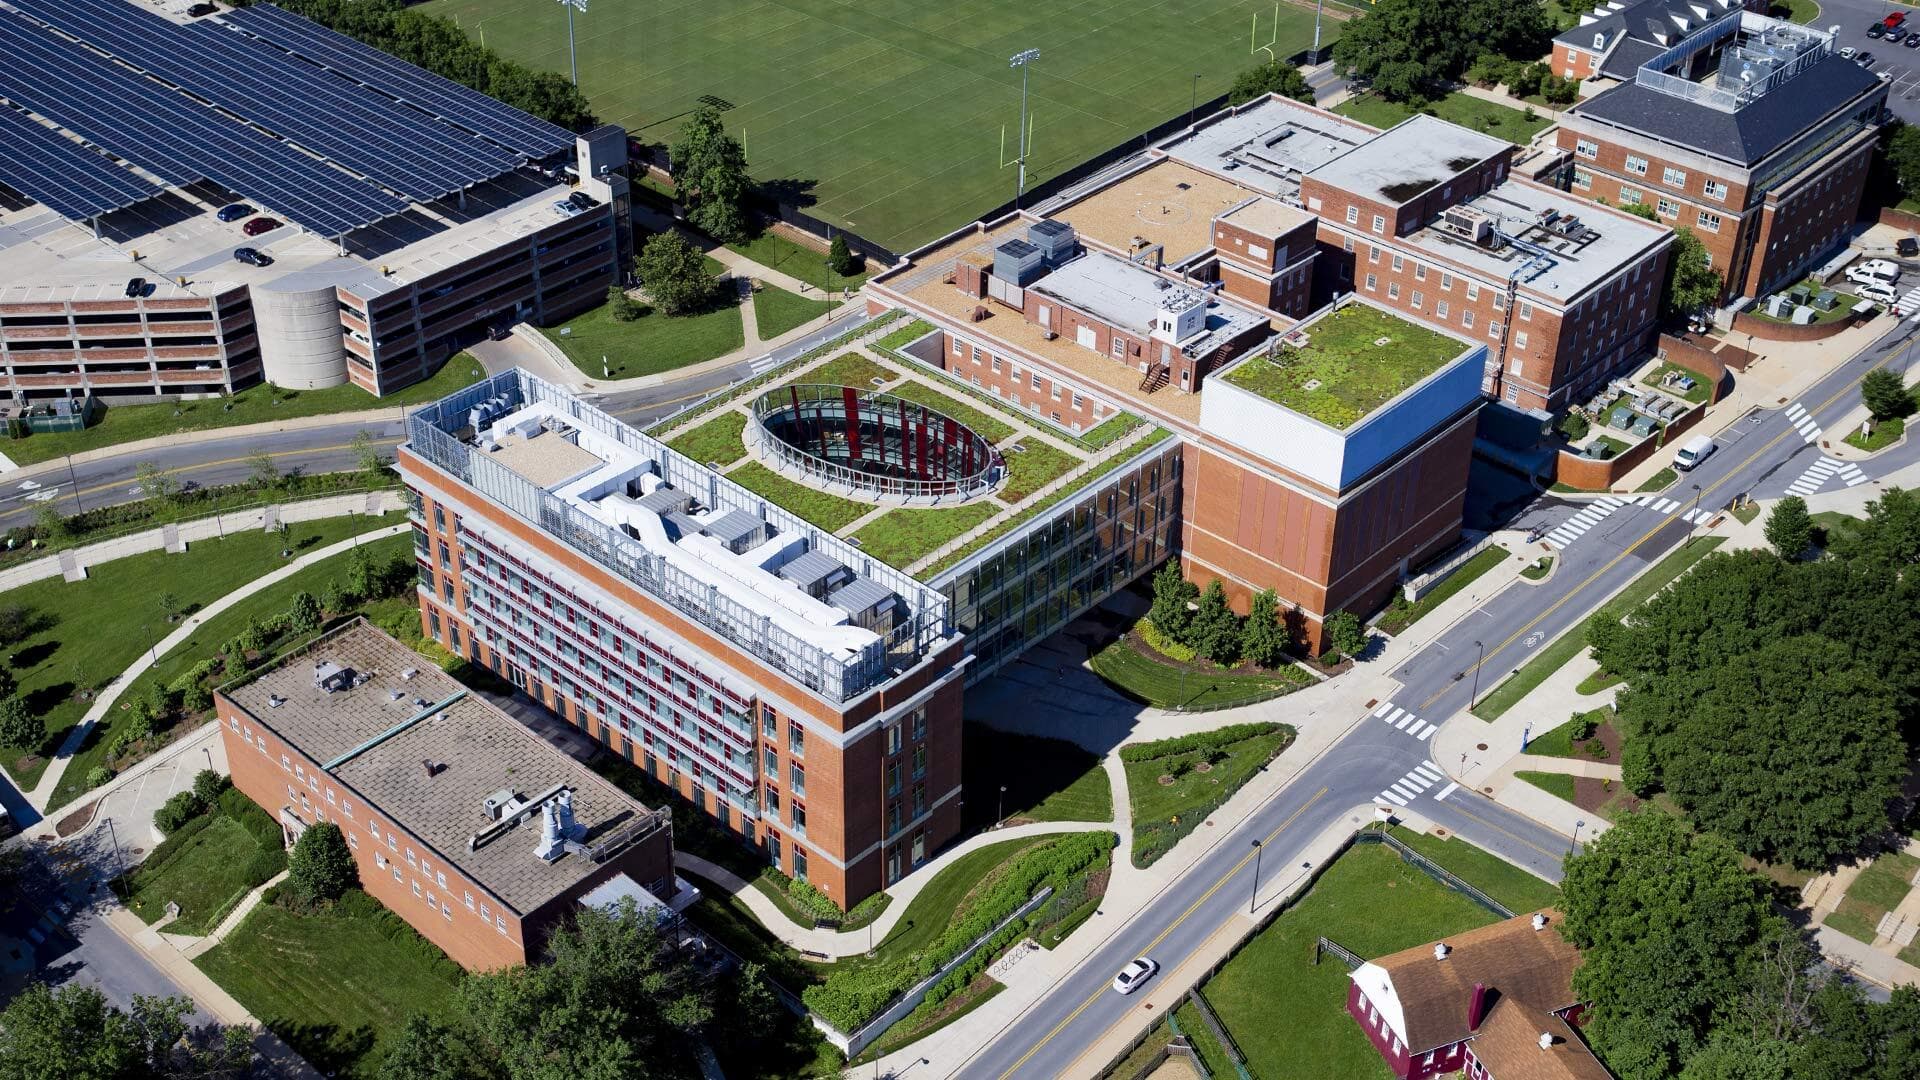 A roof garden on top of the Physical Sciences Complex and solar panels atop of Regent's Drive Garage both play a part in the University's drive to reduce greenhouse emissions.